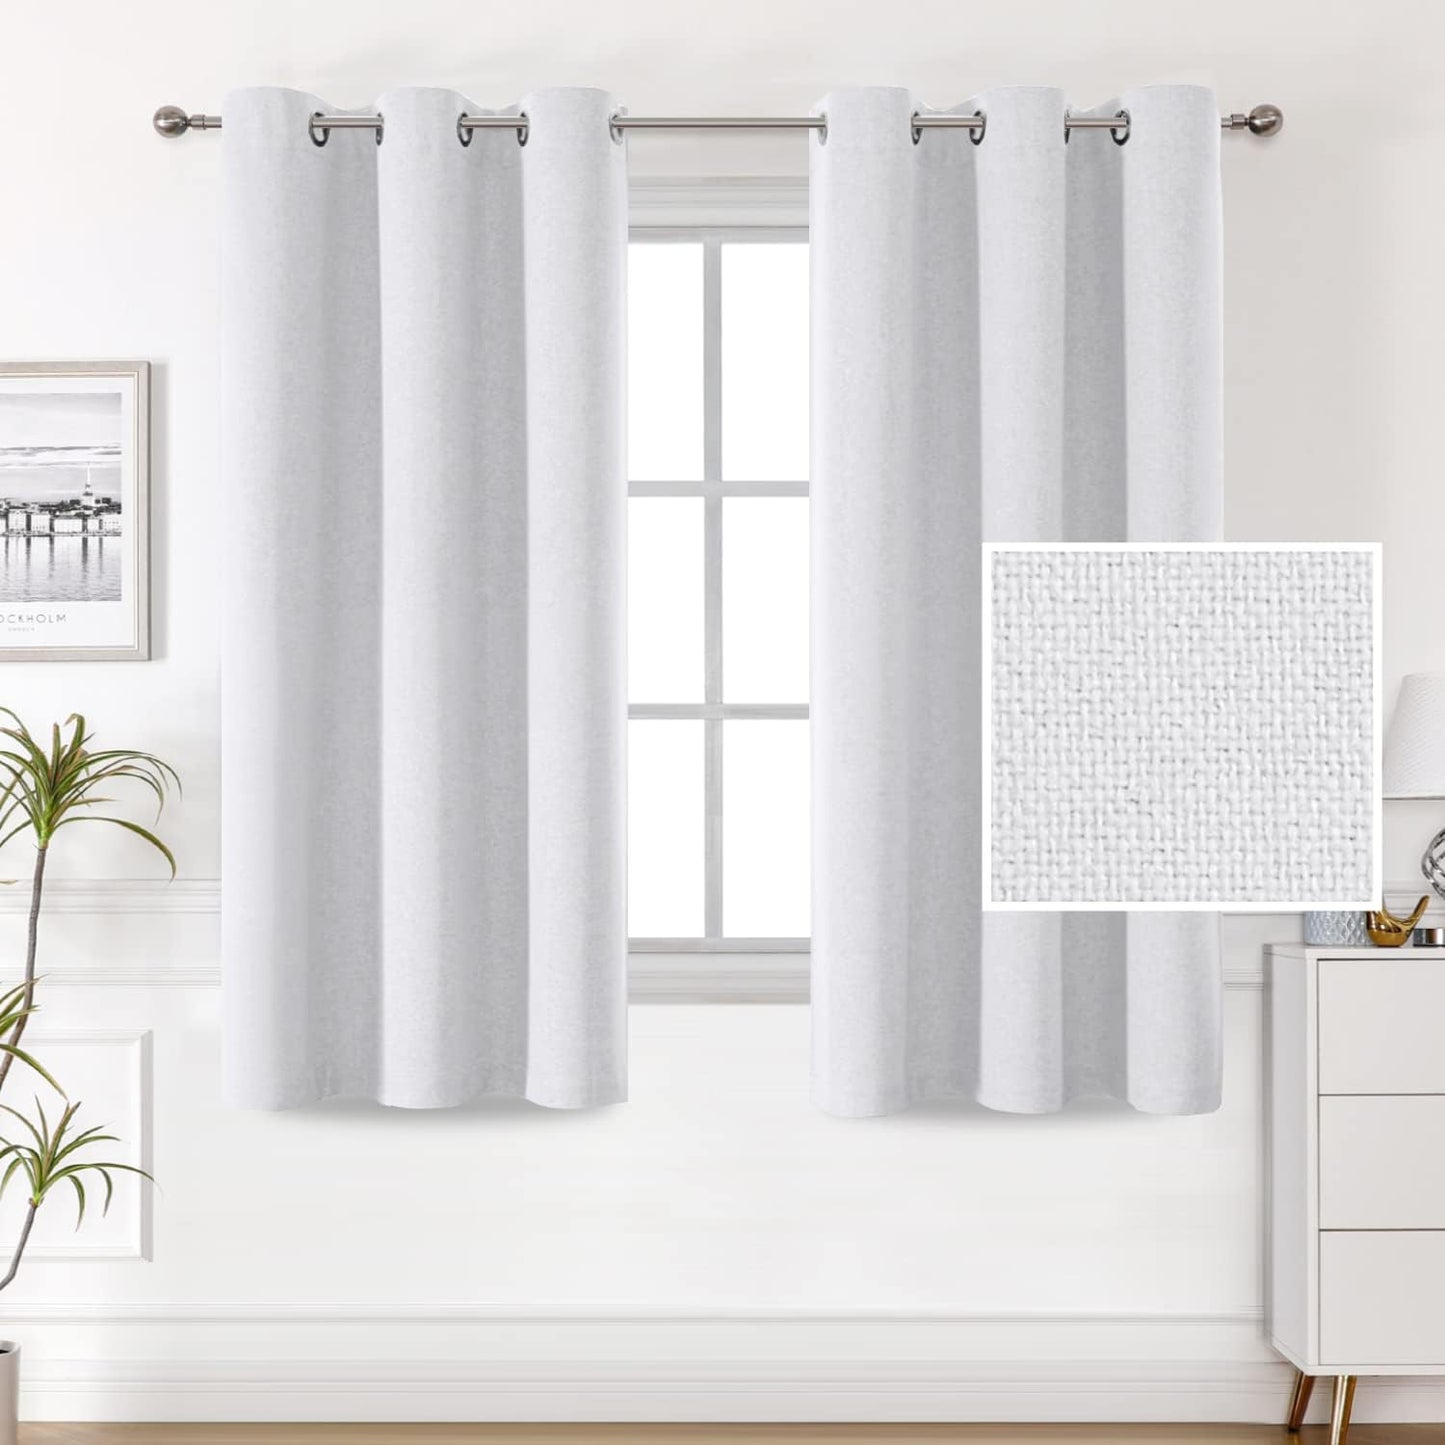 H.VERSAILTEX 100% Blackout Linen Look Curtains Thermal Insulated Curtains for Living Room Textured Burlap Drapes for Bedroom Grommet Linen Noise Blocking Curtains 42 X 84 Inch, 2 Panels - Sage  H.VERSAILTEX White 42"W X 63"L 